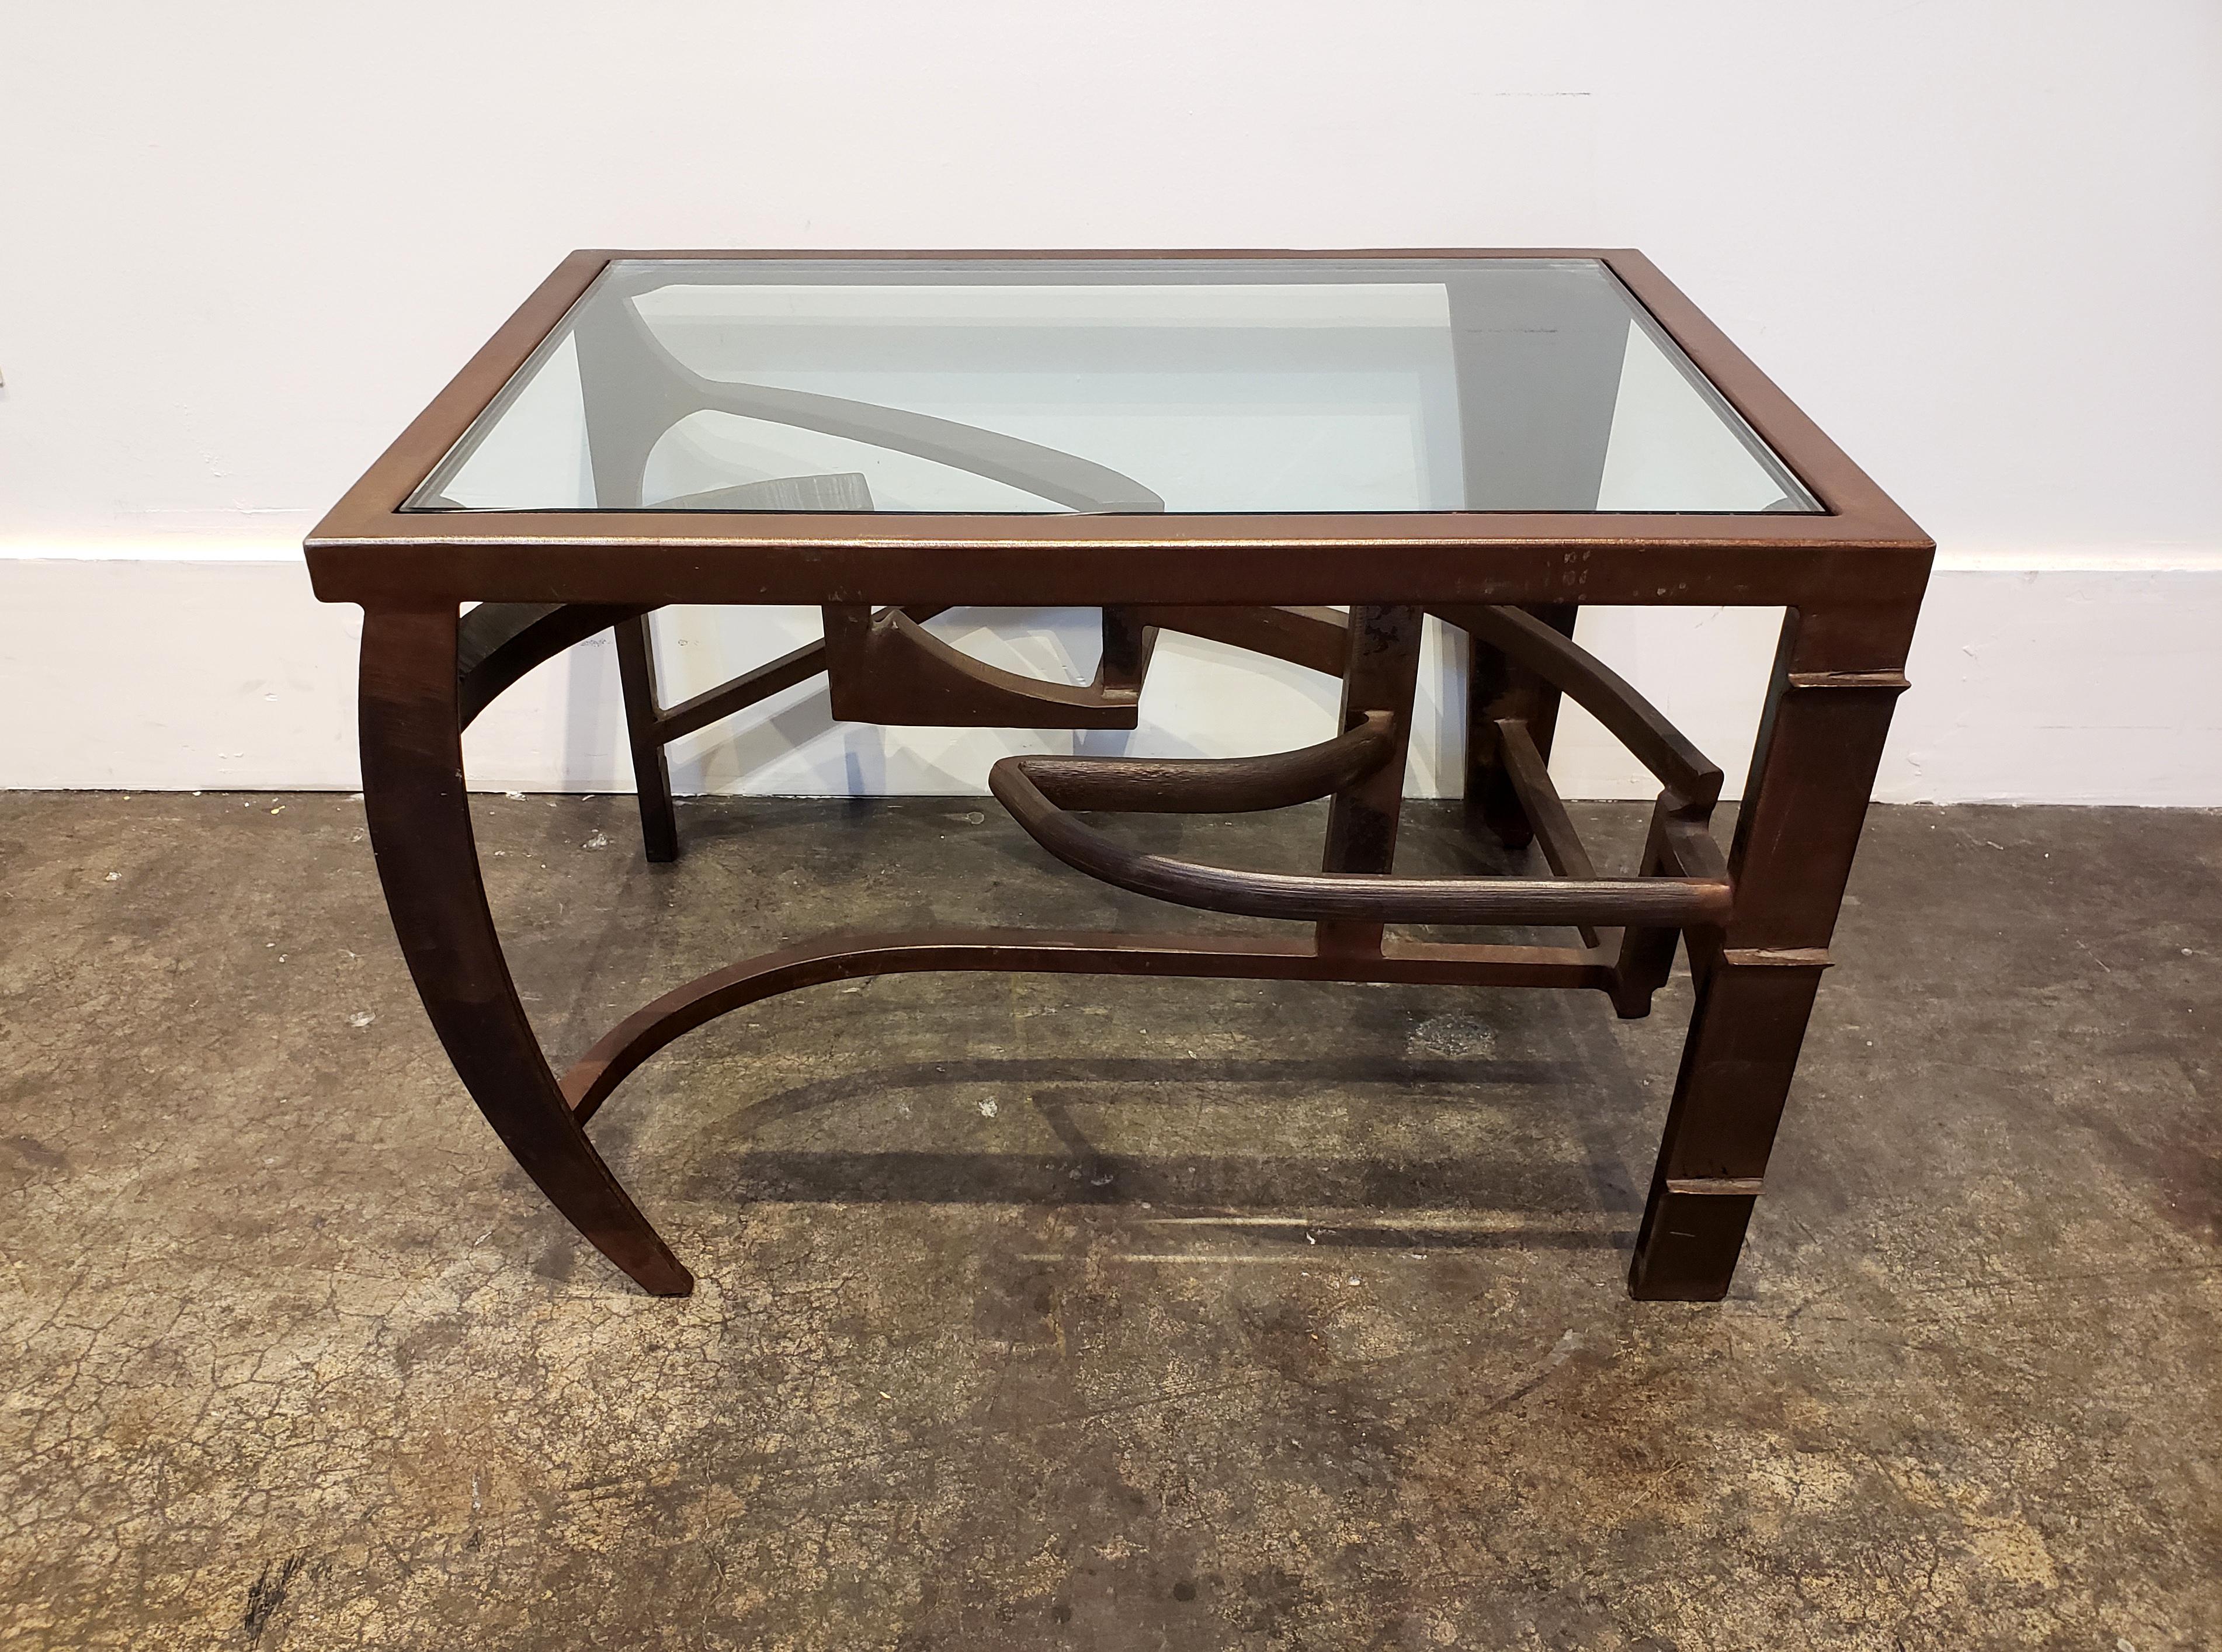 Iron side table with dynamic, intertwined sculptural base. Iron has warm patina. Top is finished in glass. Rich in detail and movement. As much a work of sculptured art as a functional table.